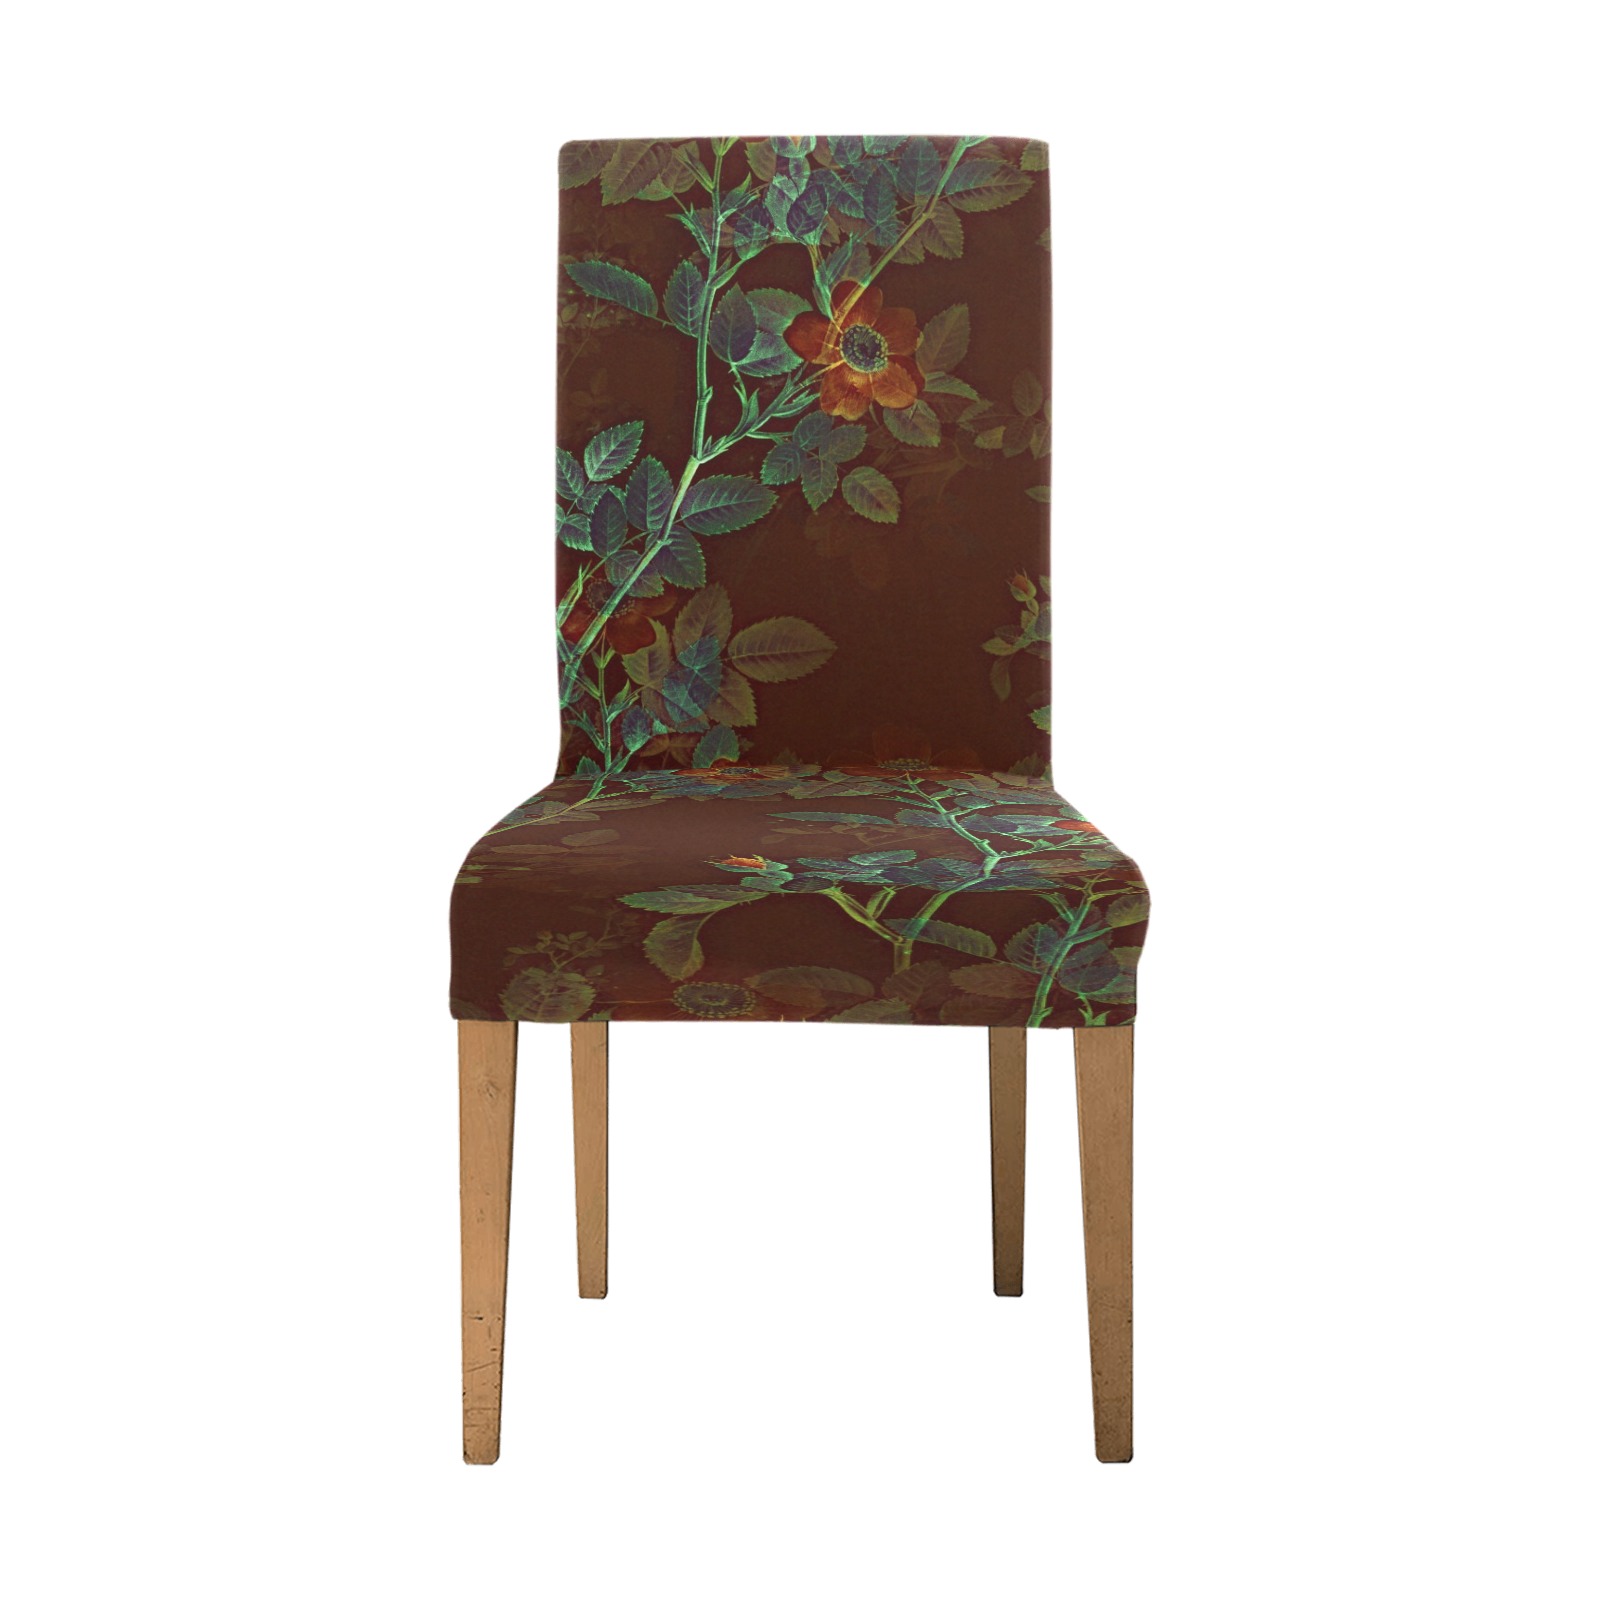 Copper Floral Removable Dining Chair Cover